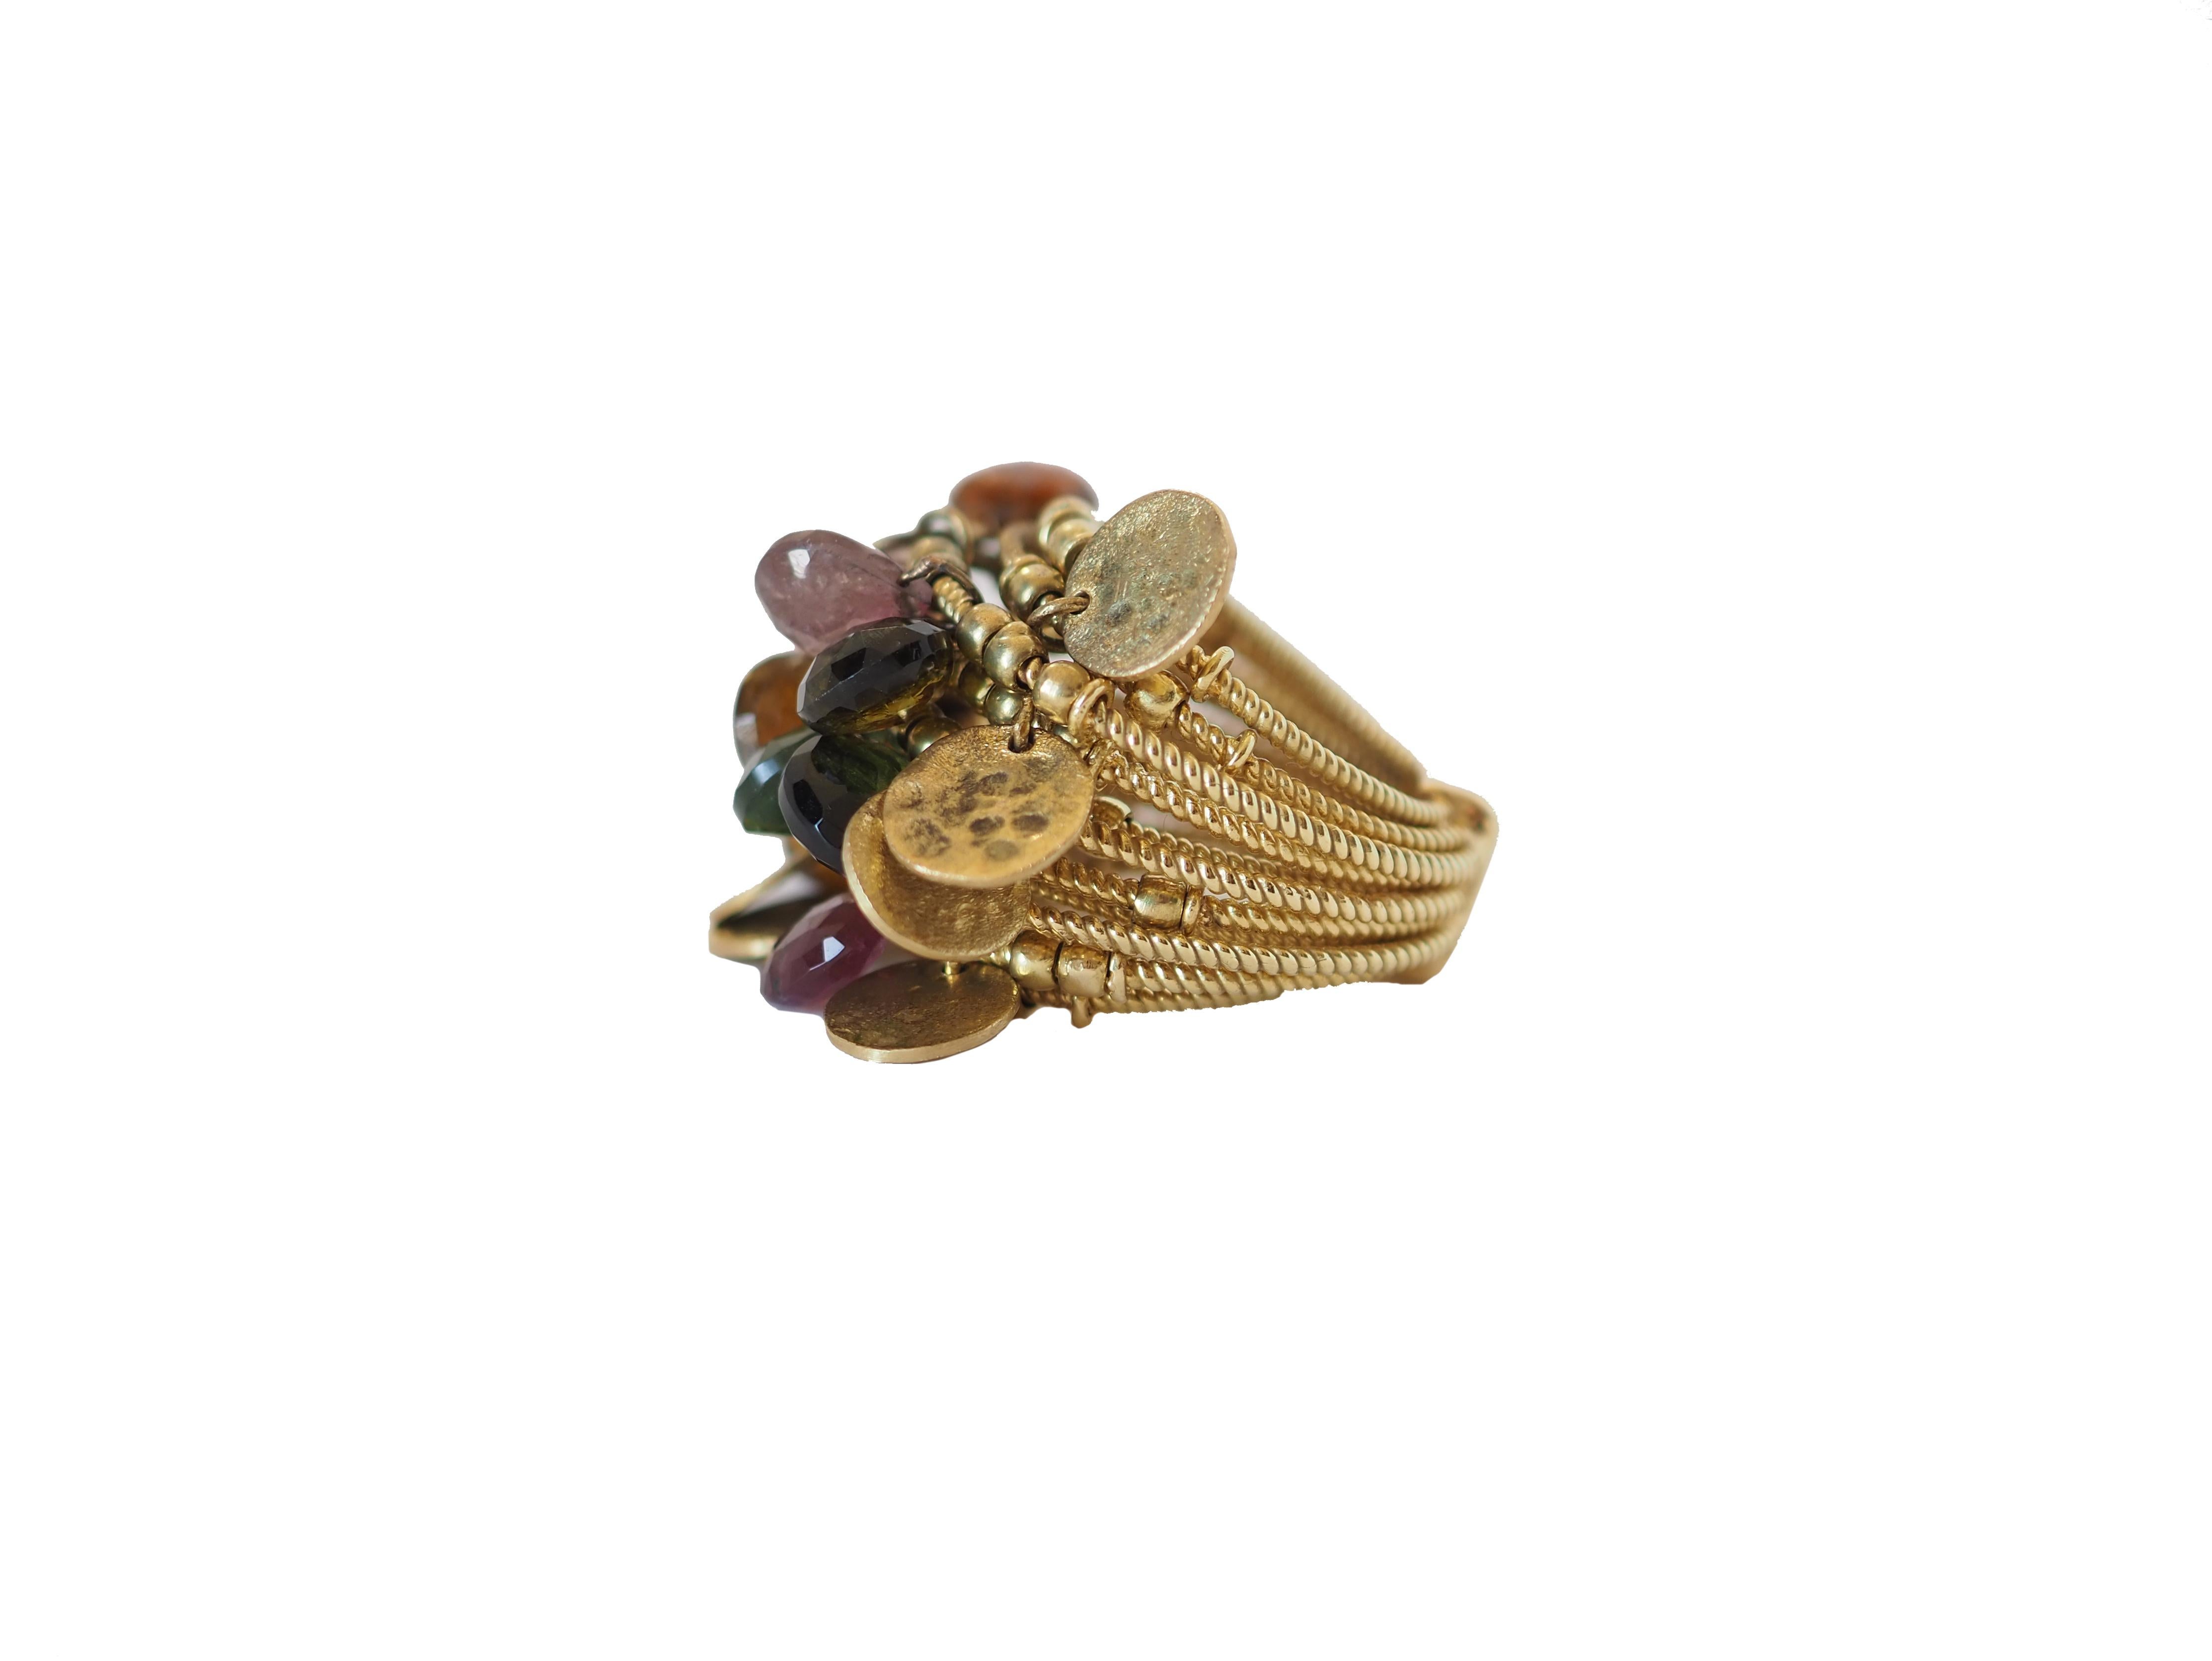 Amazing multi thread ring gold 18k gr.23, with chestnut tourmaline pink green different nuances color, size 14 eu little gold lentils.
All the ring is Tremblant and follow the hand movements.
All Giulia Colussi jewelry is new and has never been